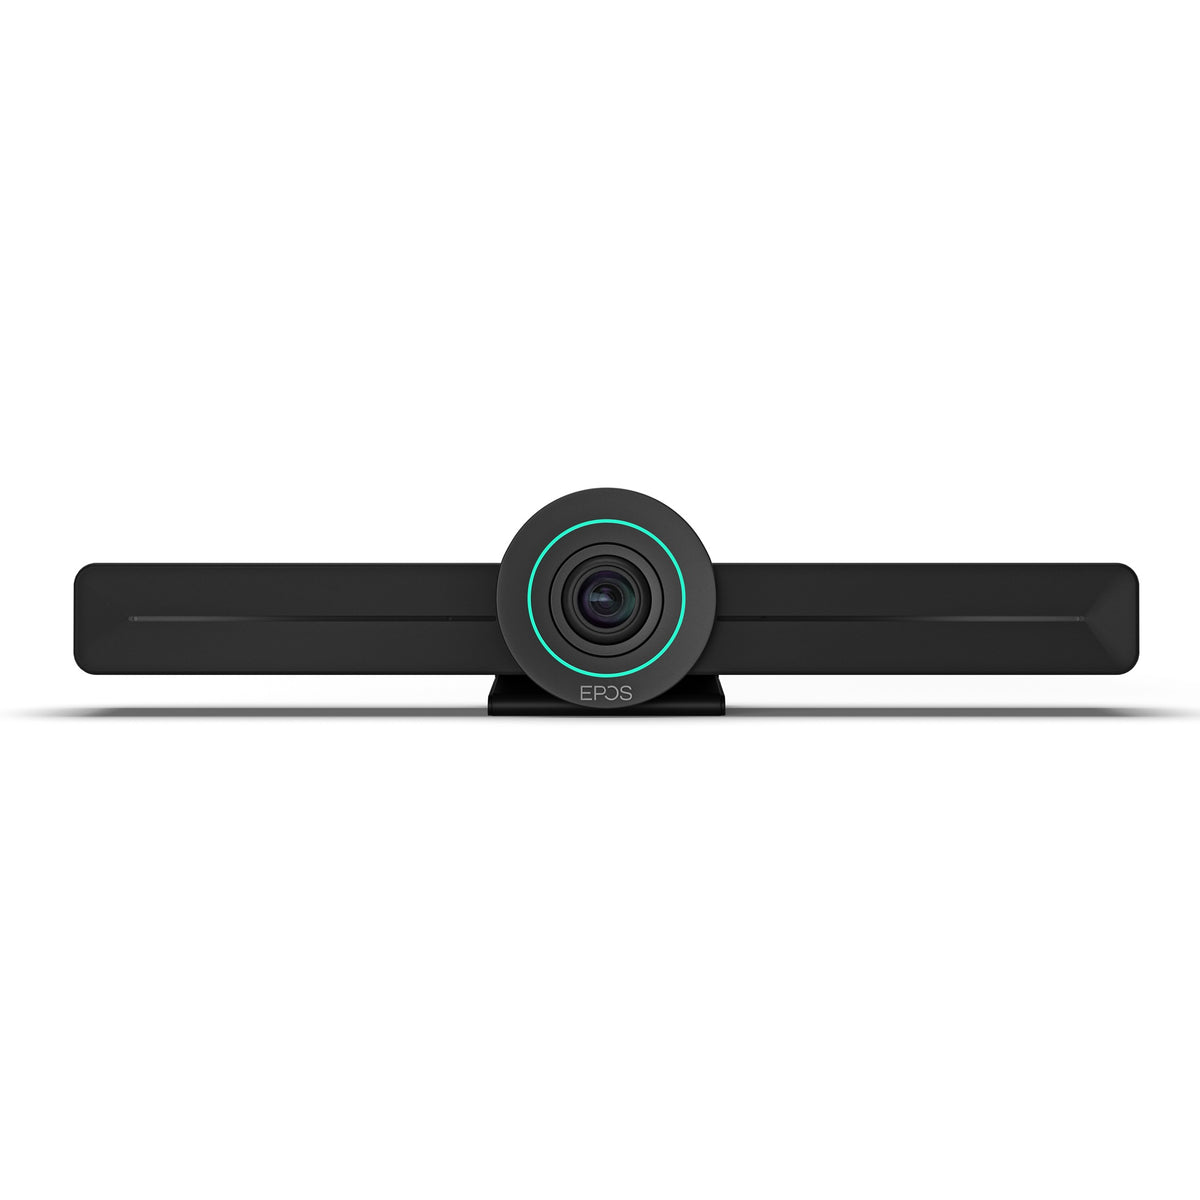 SENNHEISER EXPAND Vision 3T 4K EPOS Video Conferencing System